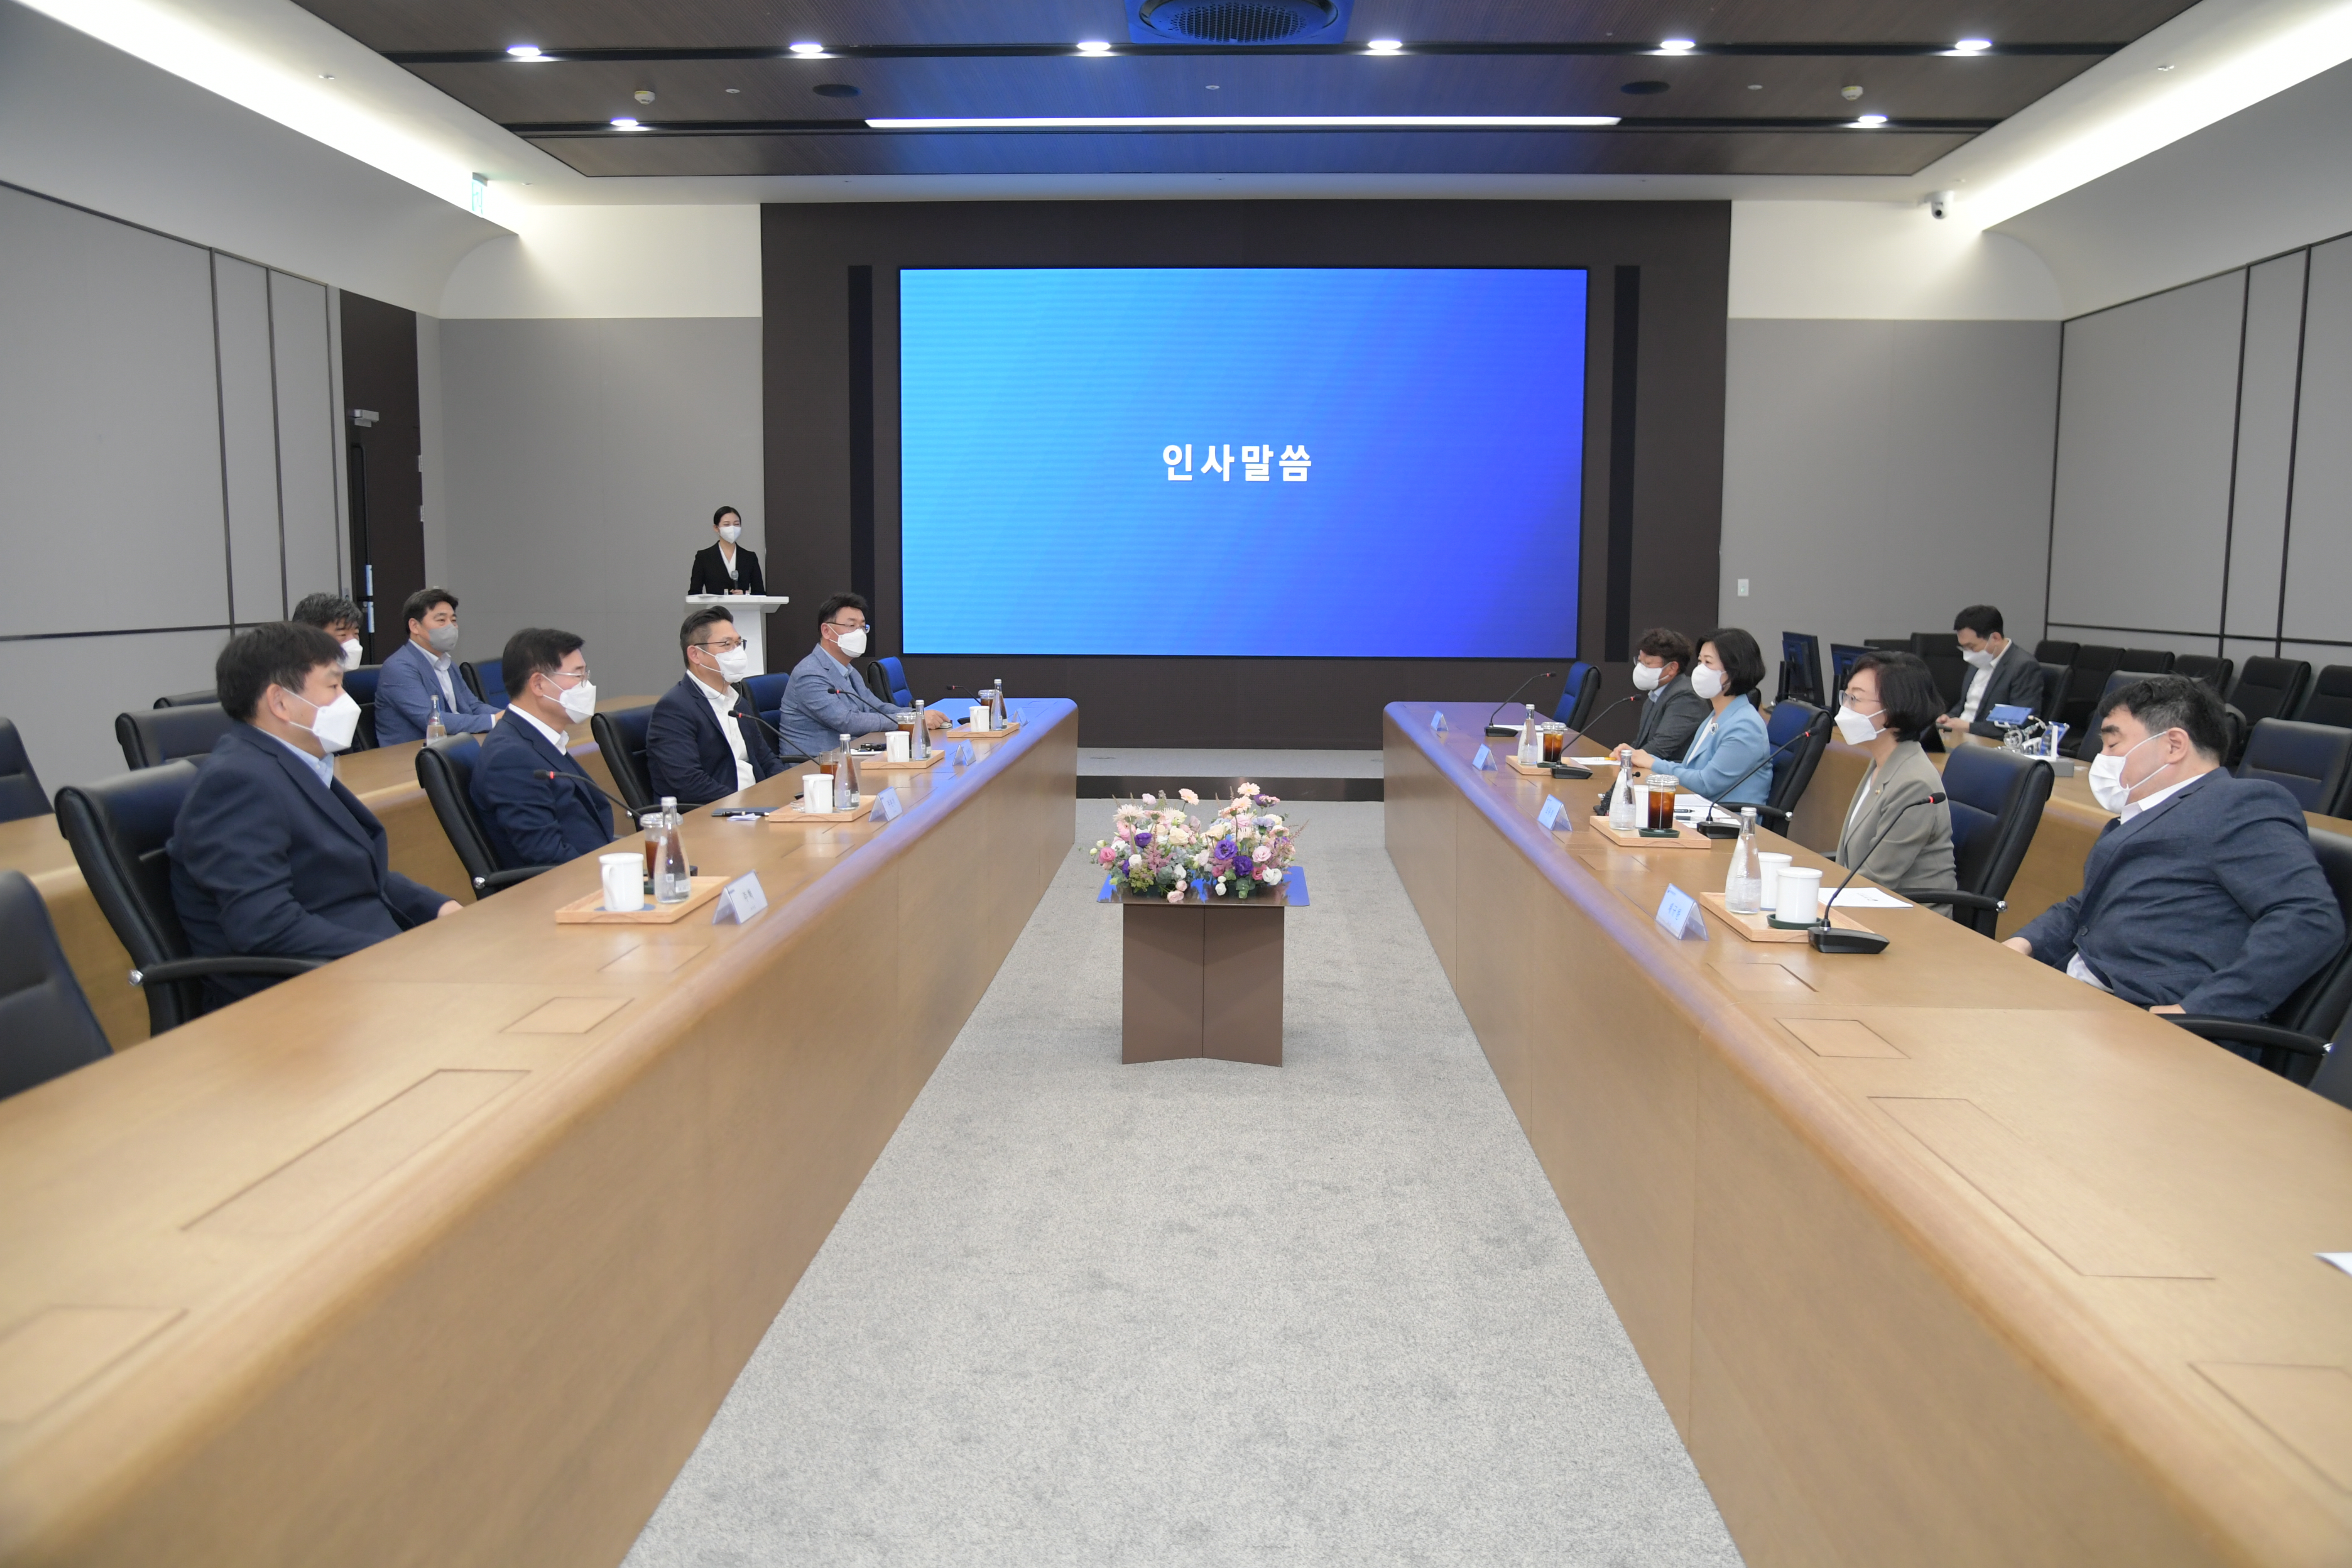 Photo News2 - [July 5, 2022] Minister Visits Digital Medical Device Manufacturing Site